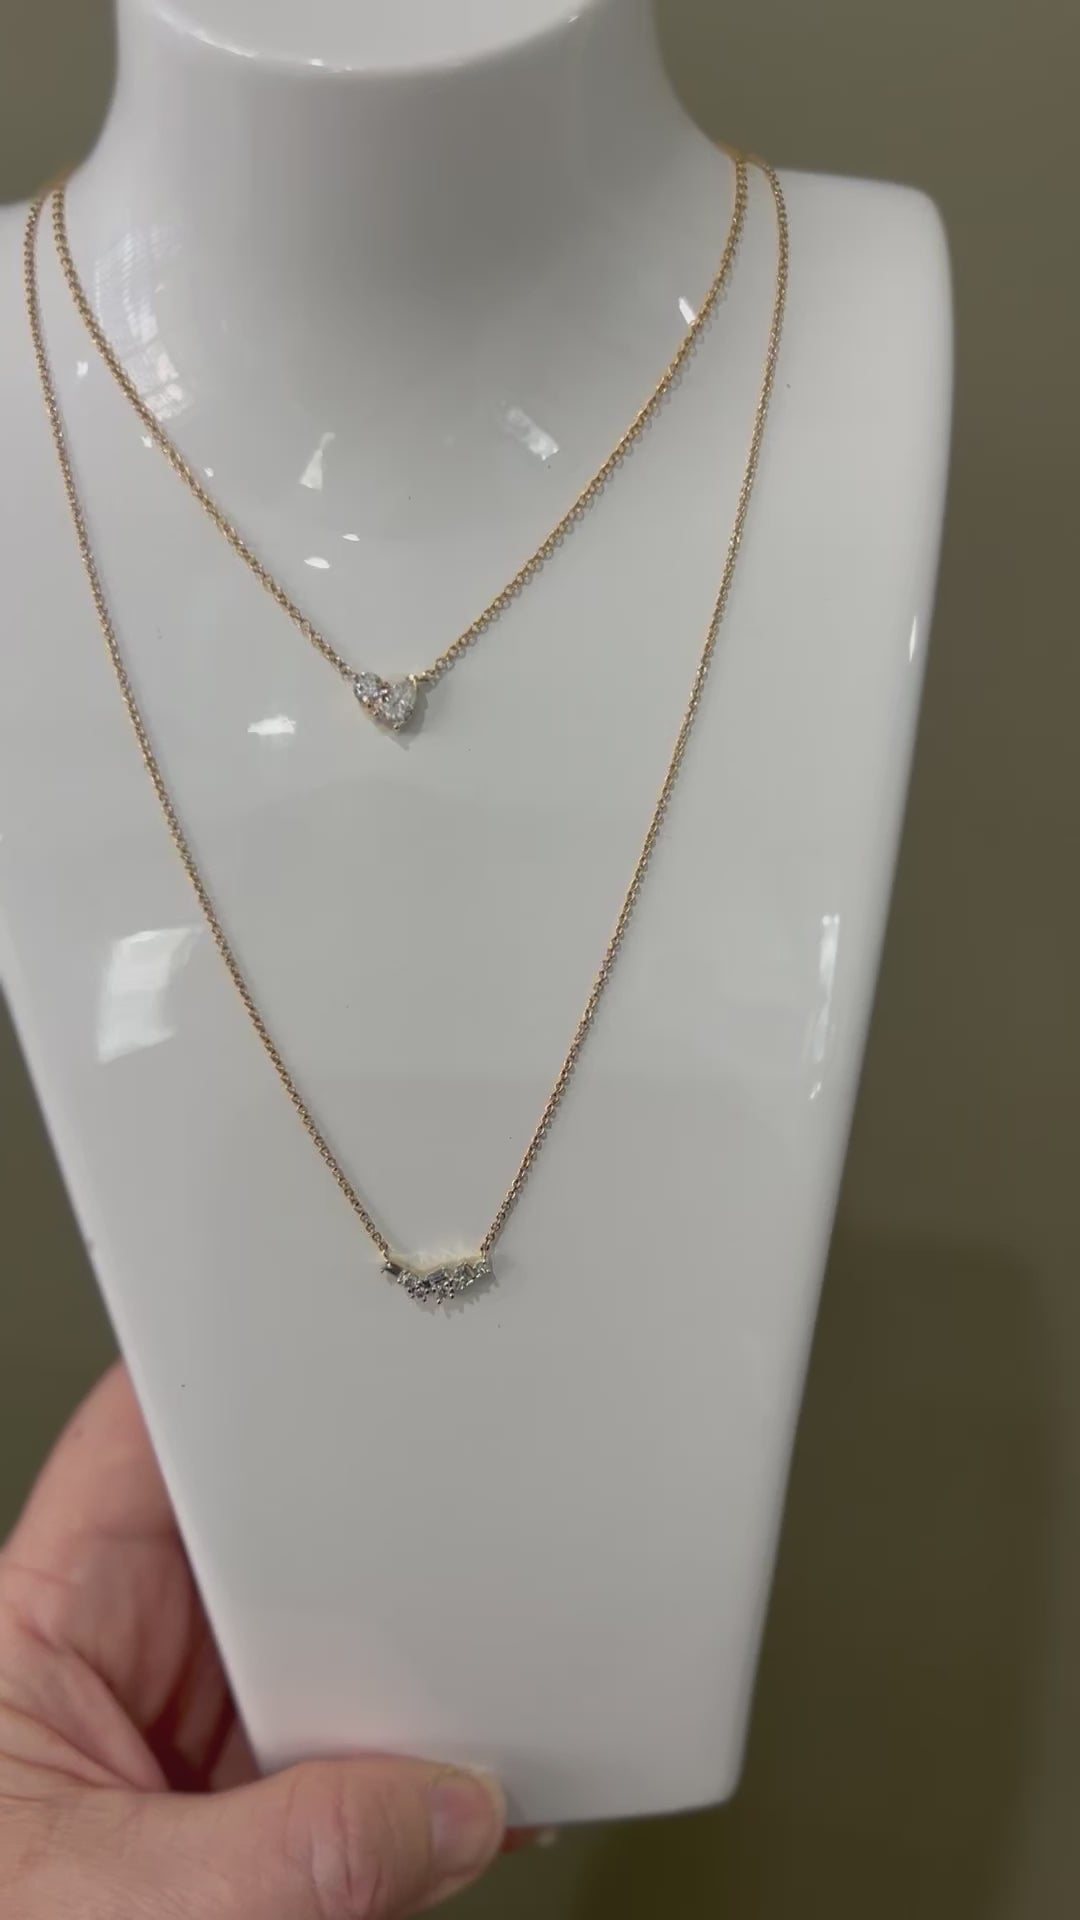 9ct Gold Scattered Diamond Necklace.